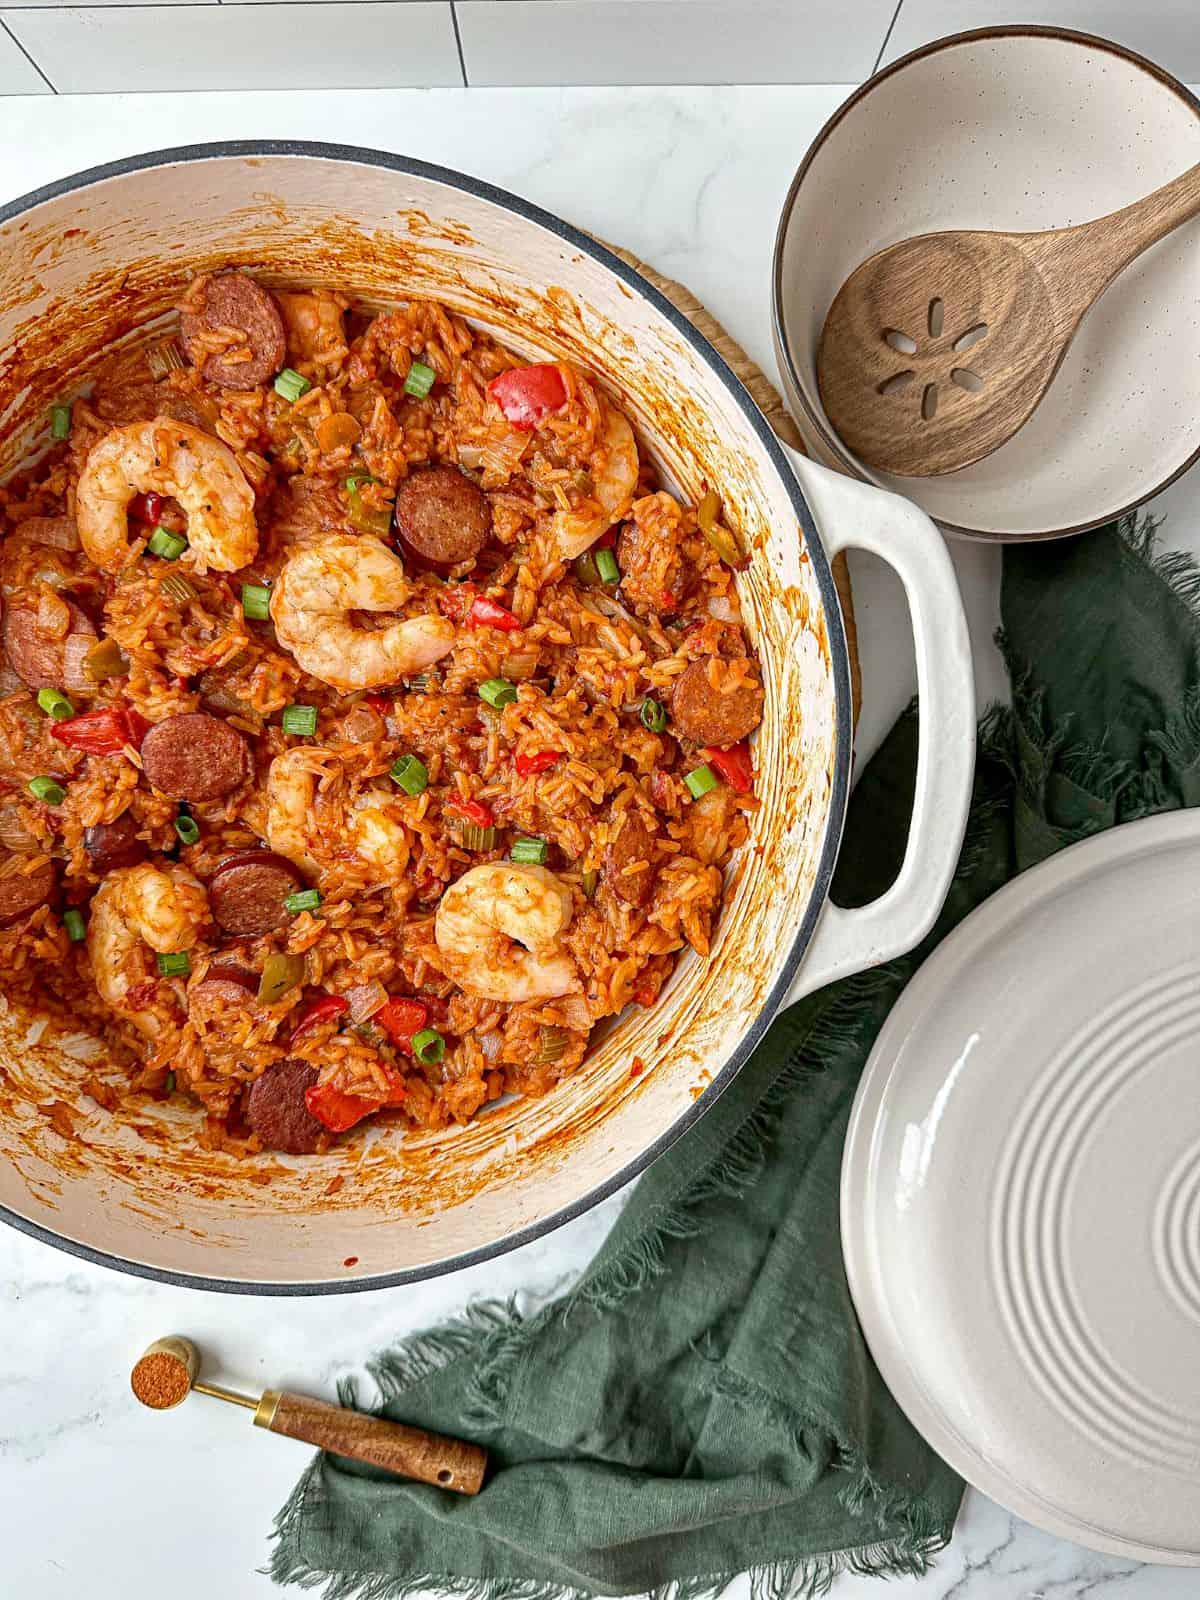 Red creole jambalaya cooked in a Dutch oven. The oven lid and a white bowl with a wooden spoon are next to the pot.